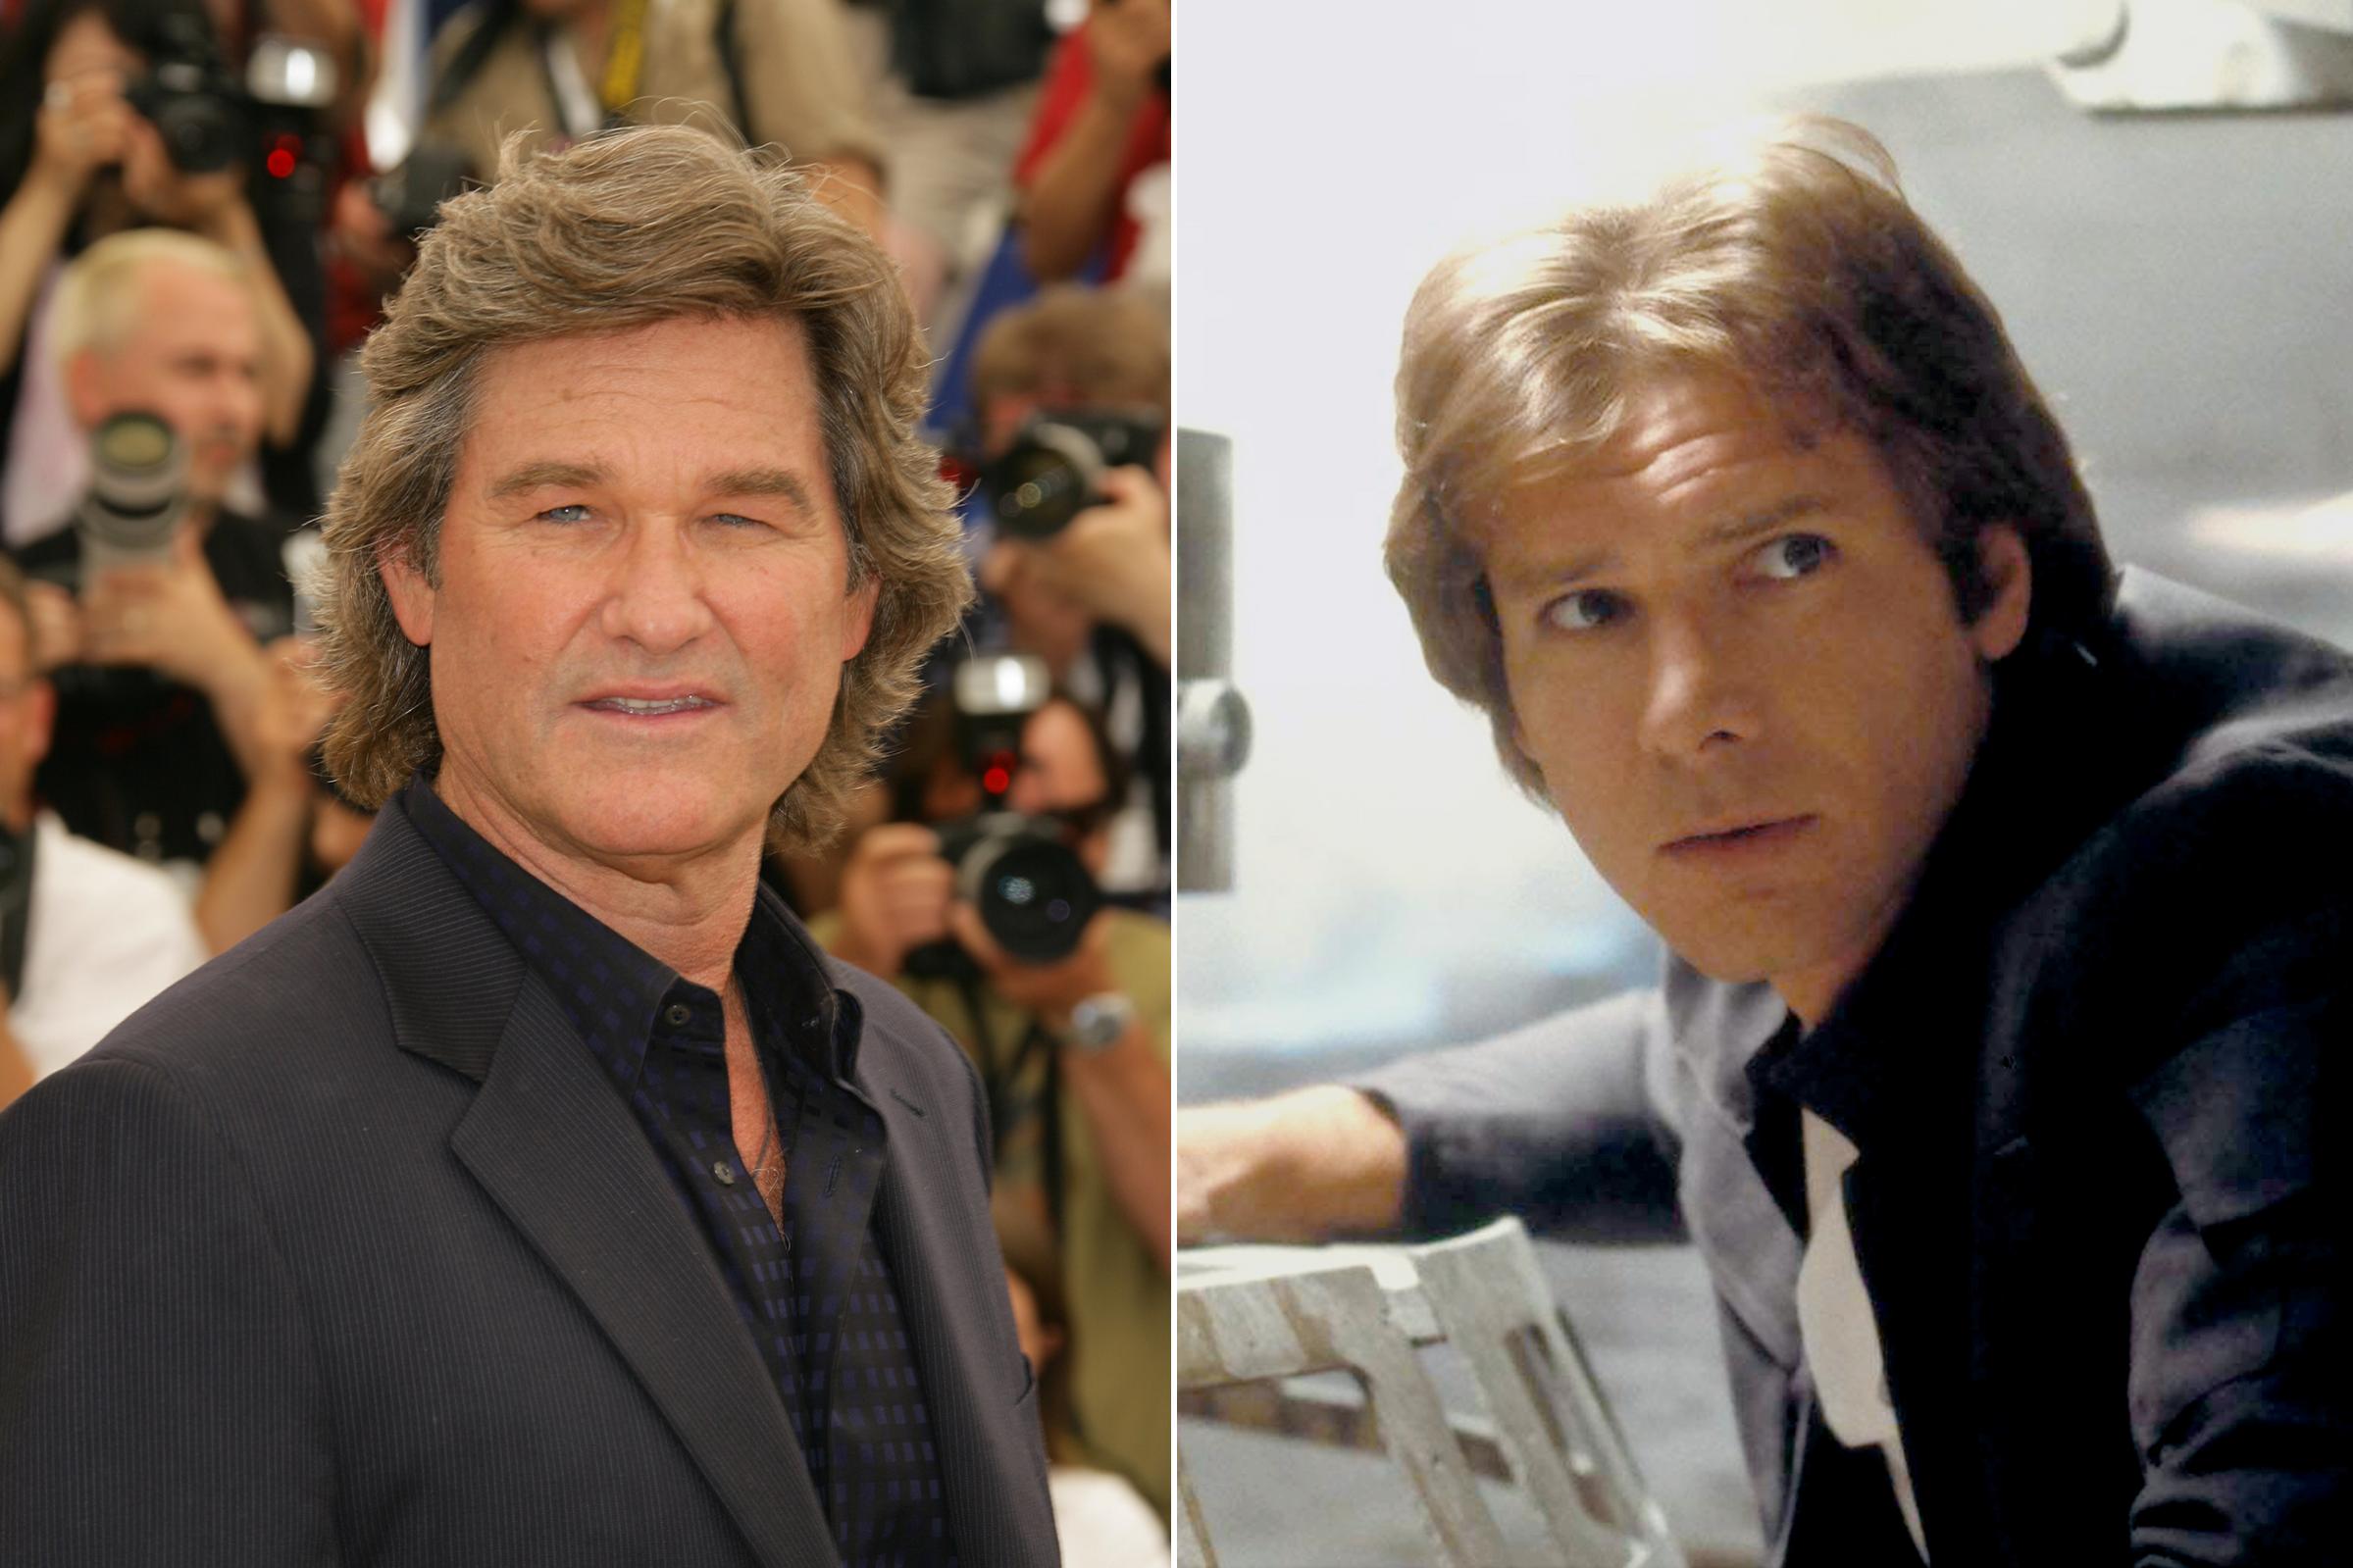 Kurt Russell was almost cast as Han Solo in Star Wars